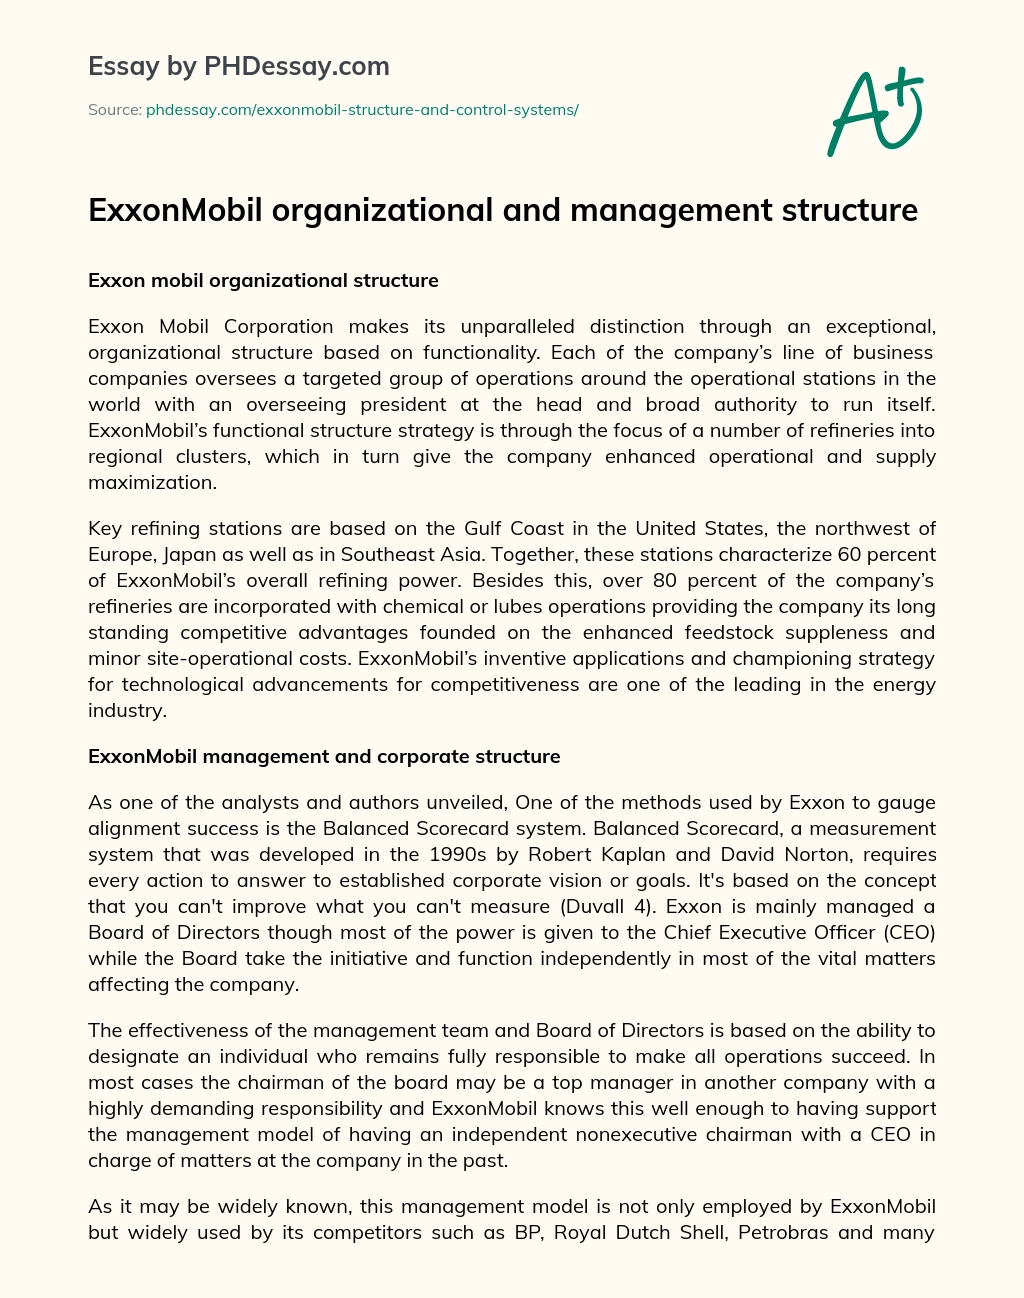 ExxonMobil organizational and management structure essay